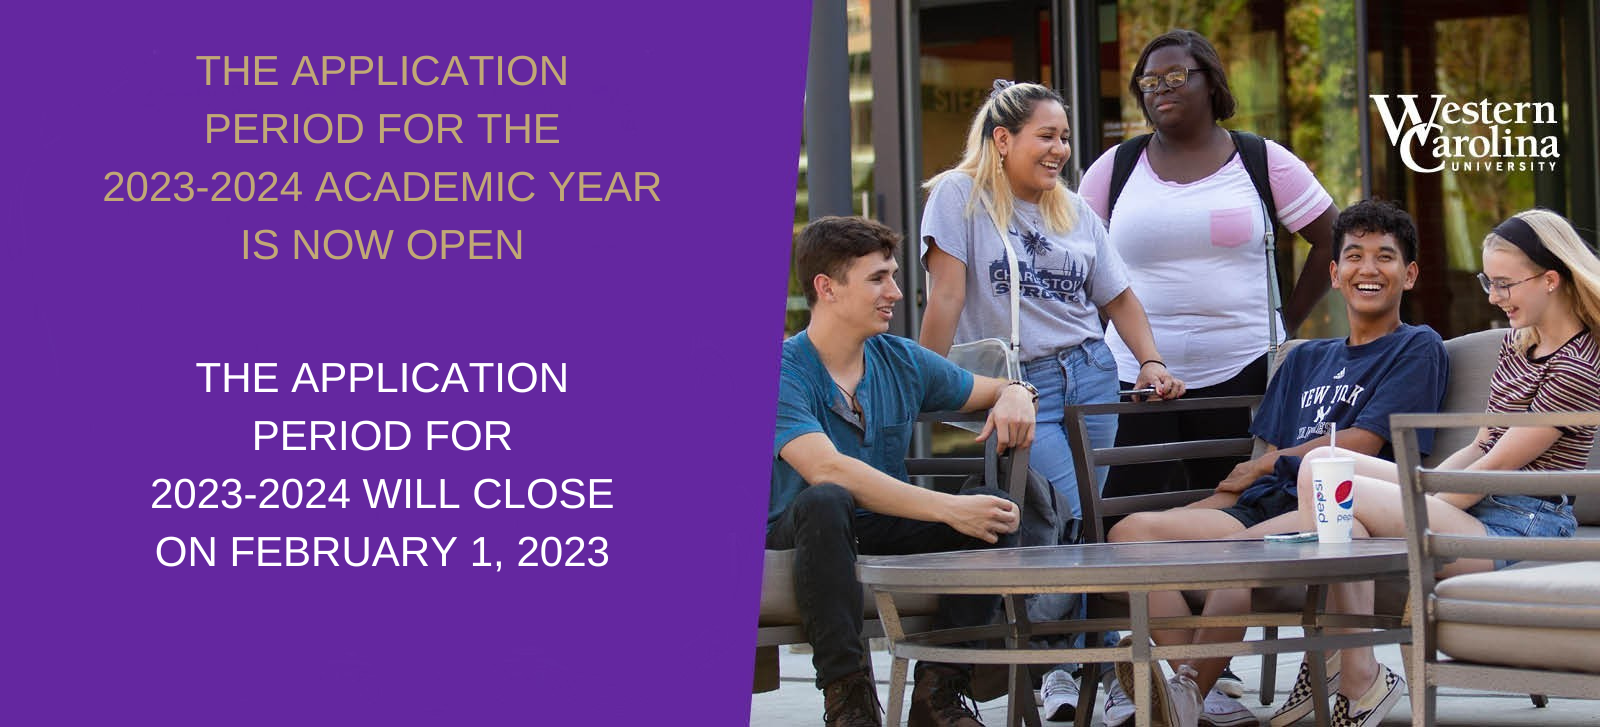 The application period for the 2023-2024 academic year will open on October 1, 2022.